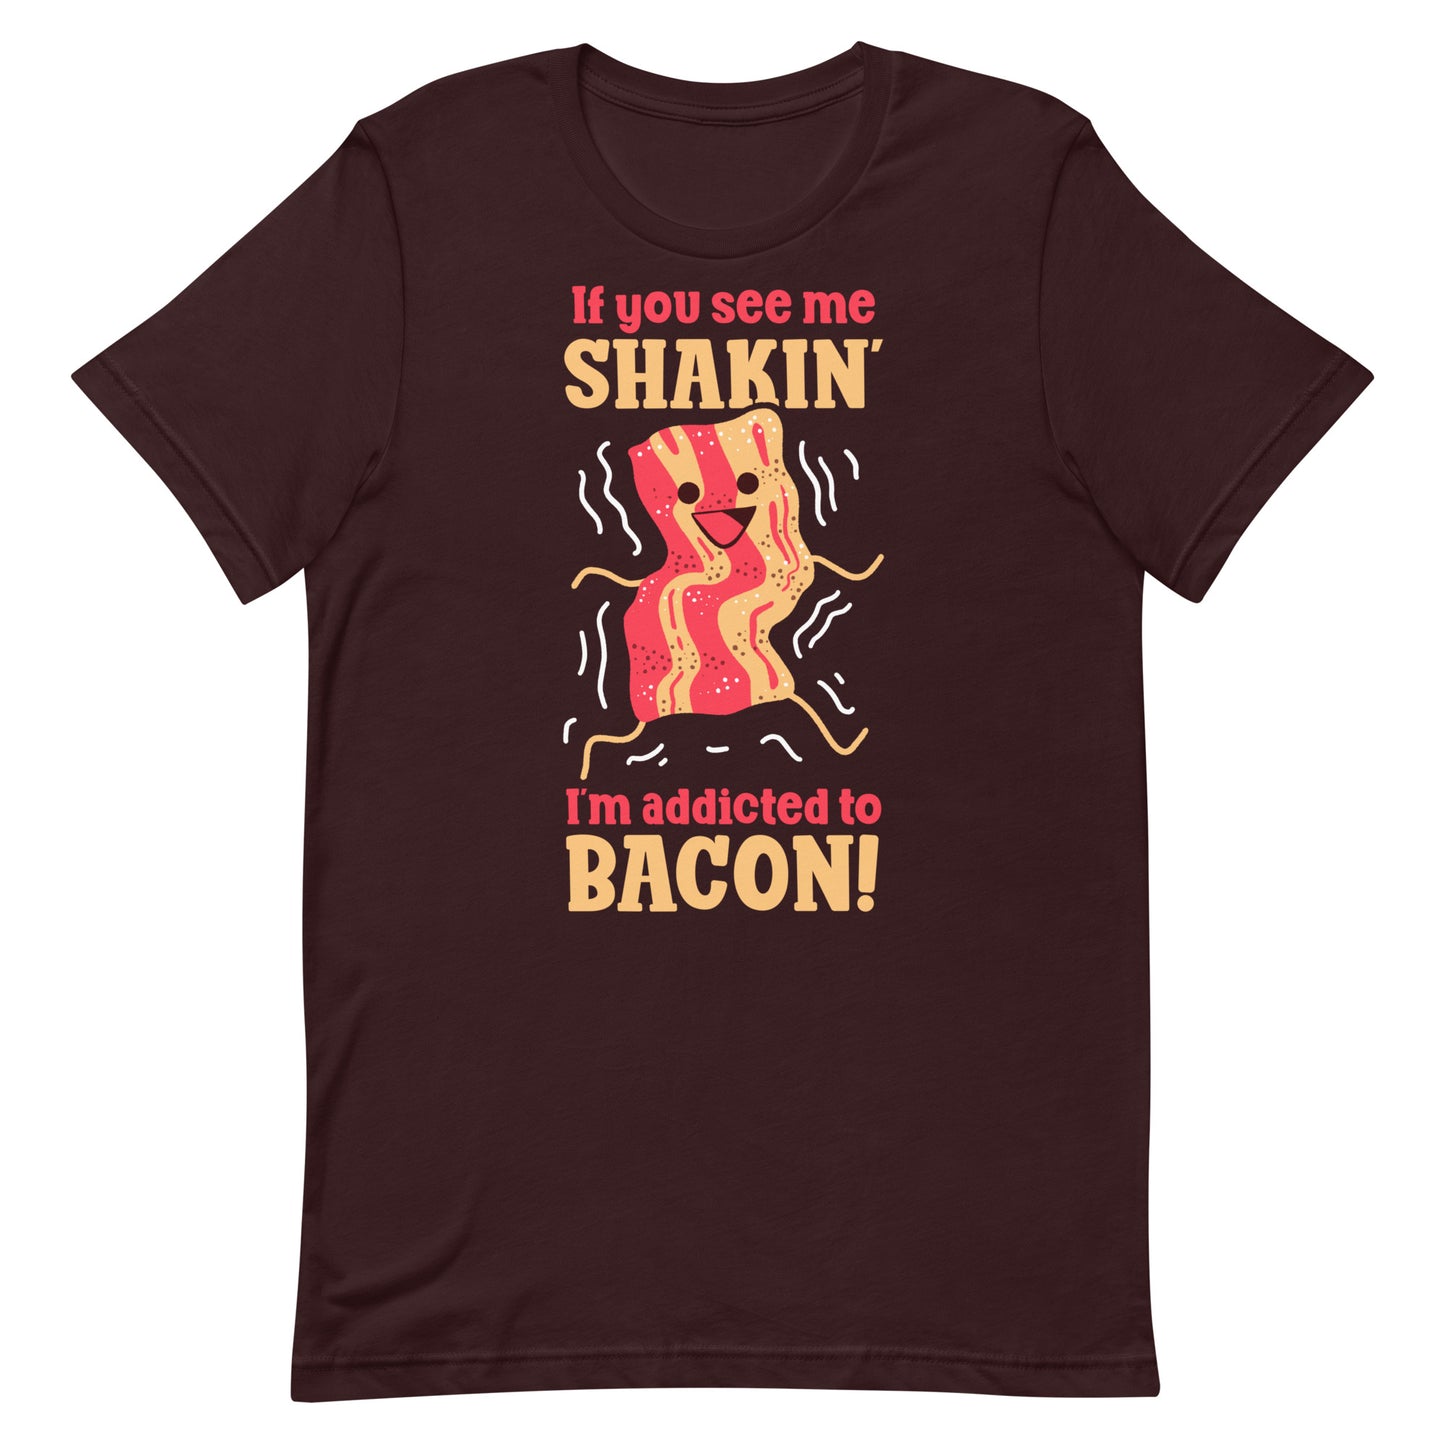 Addicted to bacon funny food t-shirt